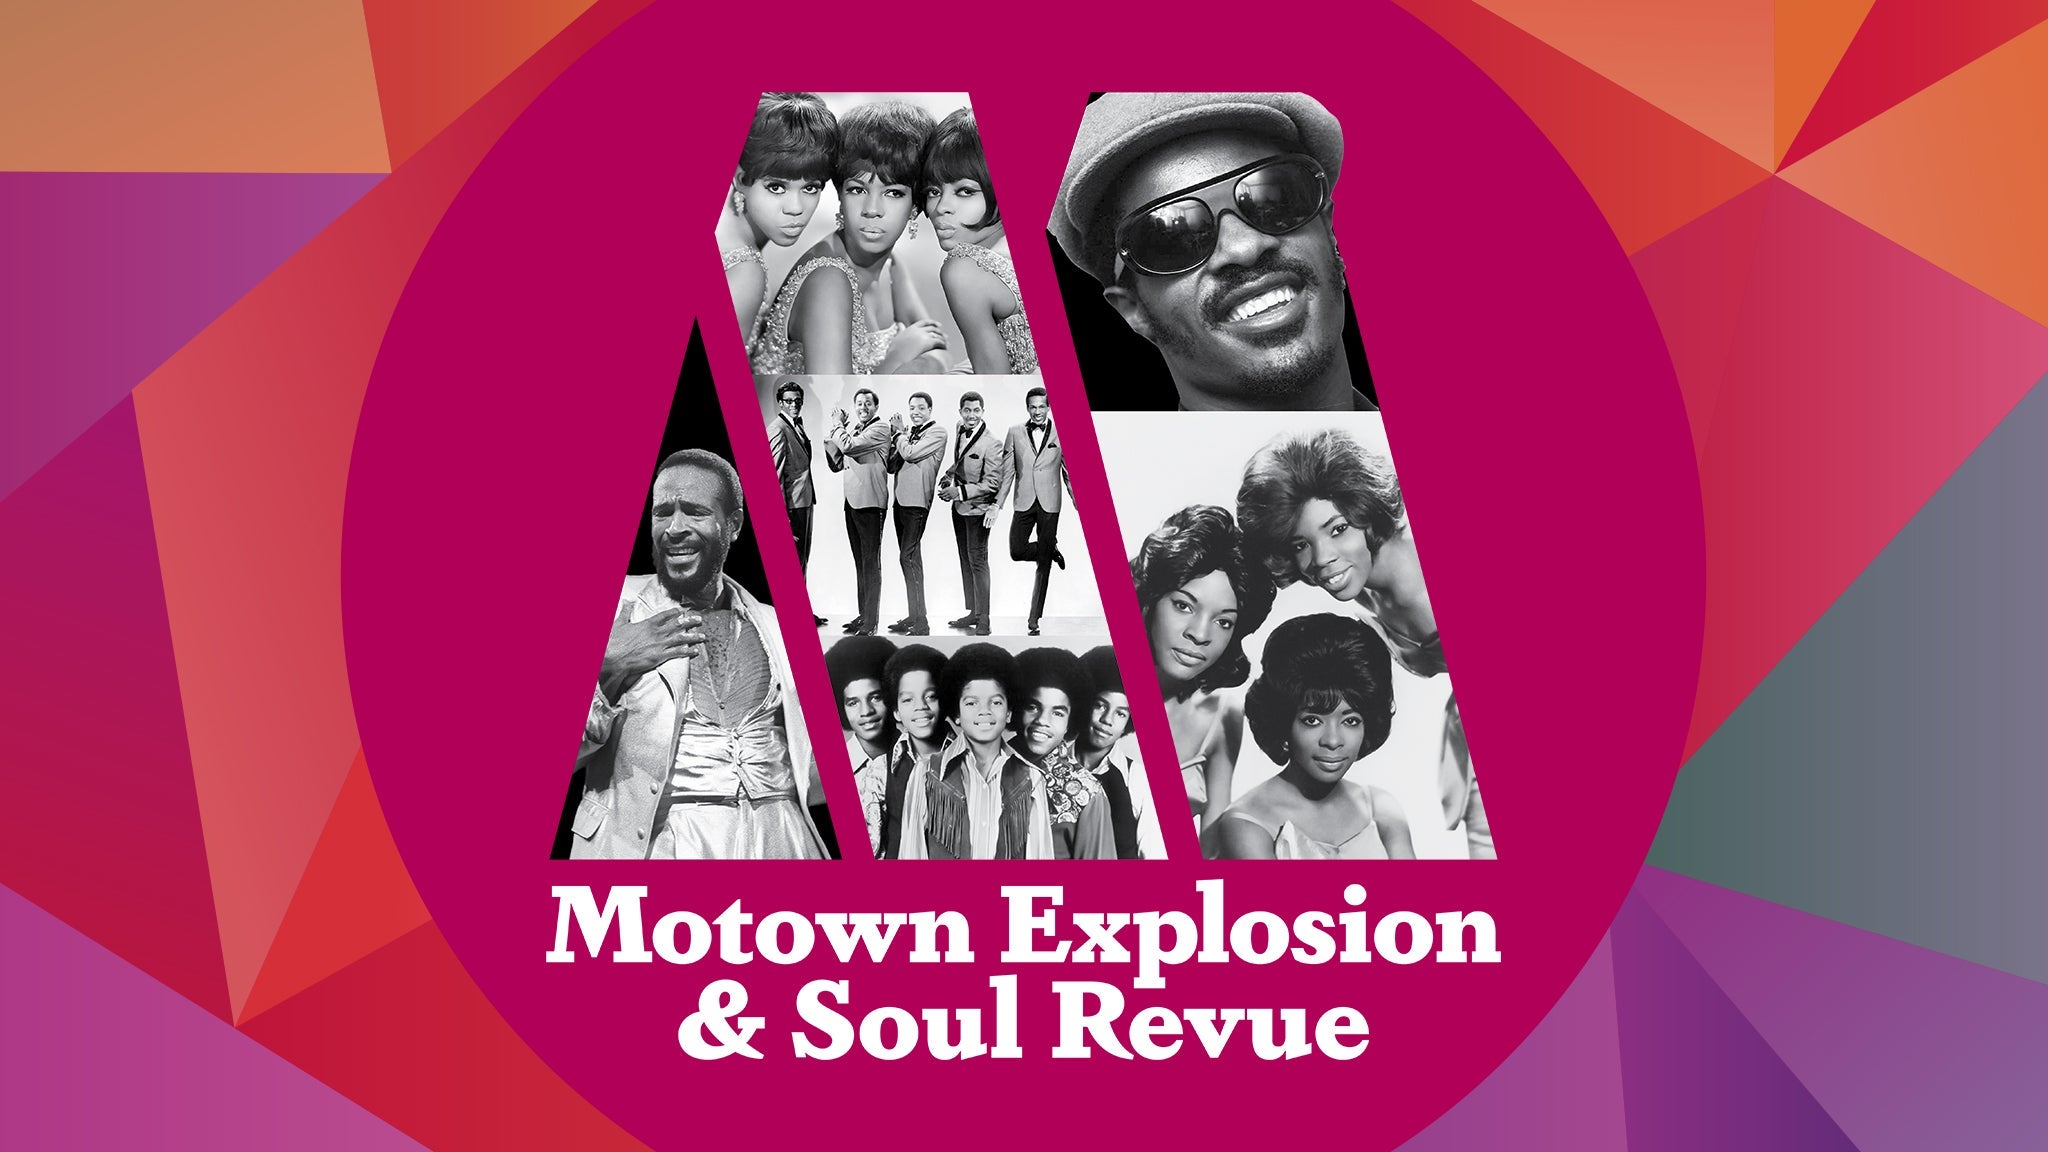 Main image for event titled Motown Explosion and Soul Revue